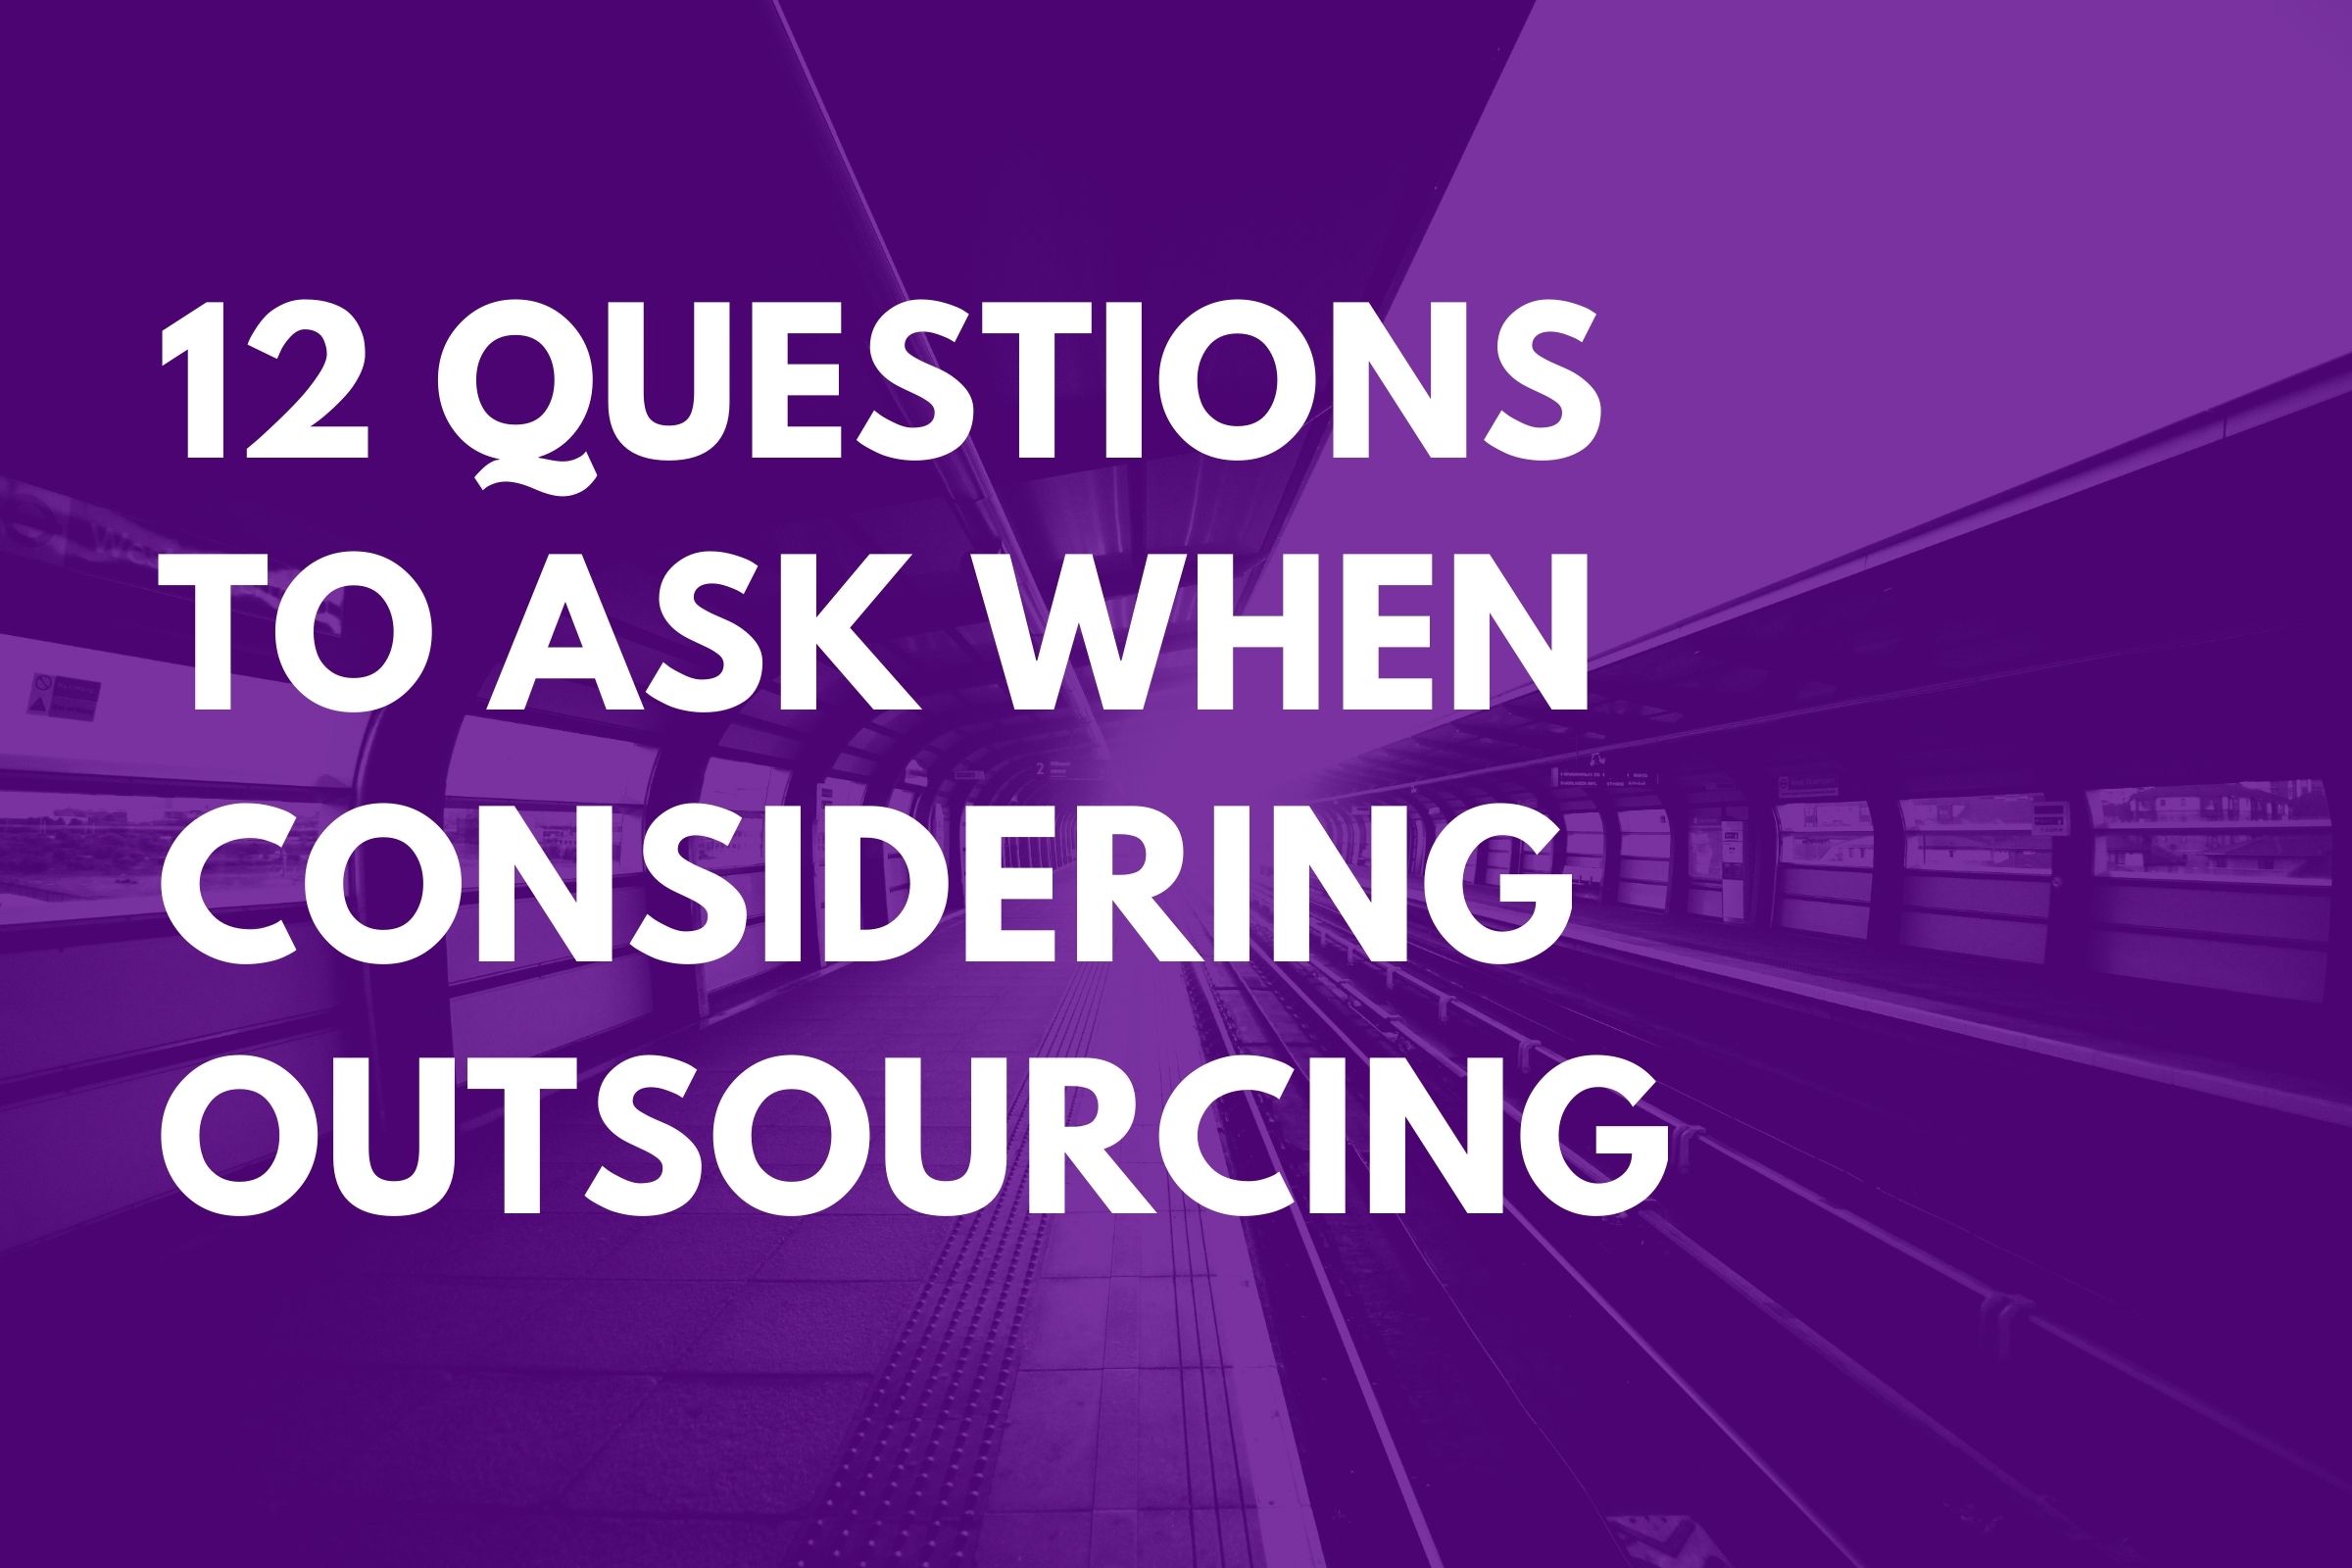 12 Questions to Ask When Considering Outsourcing